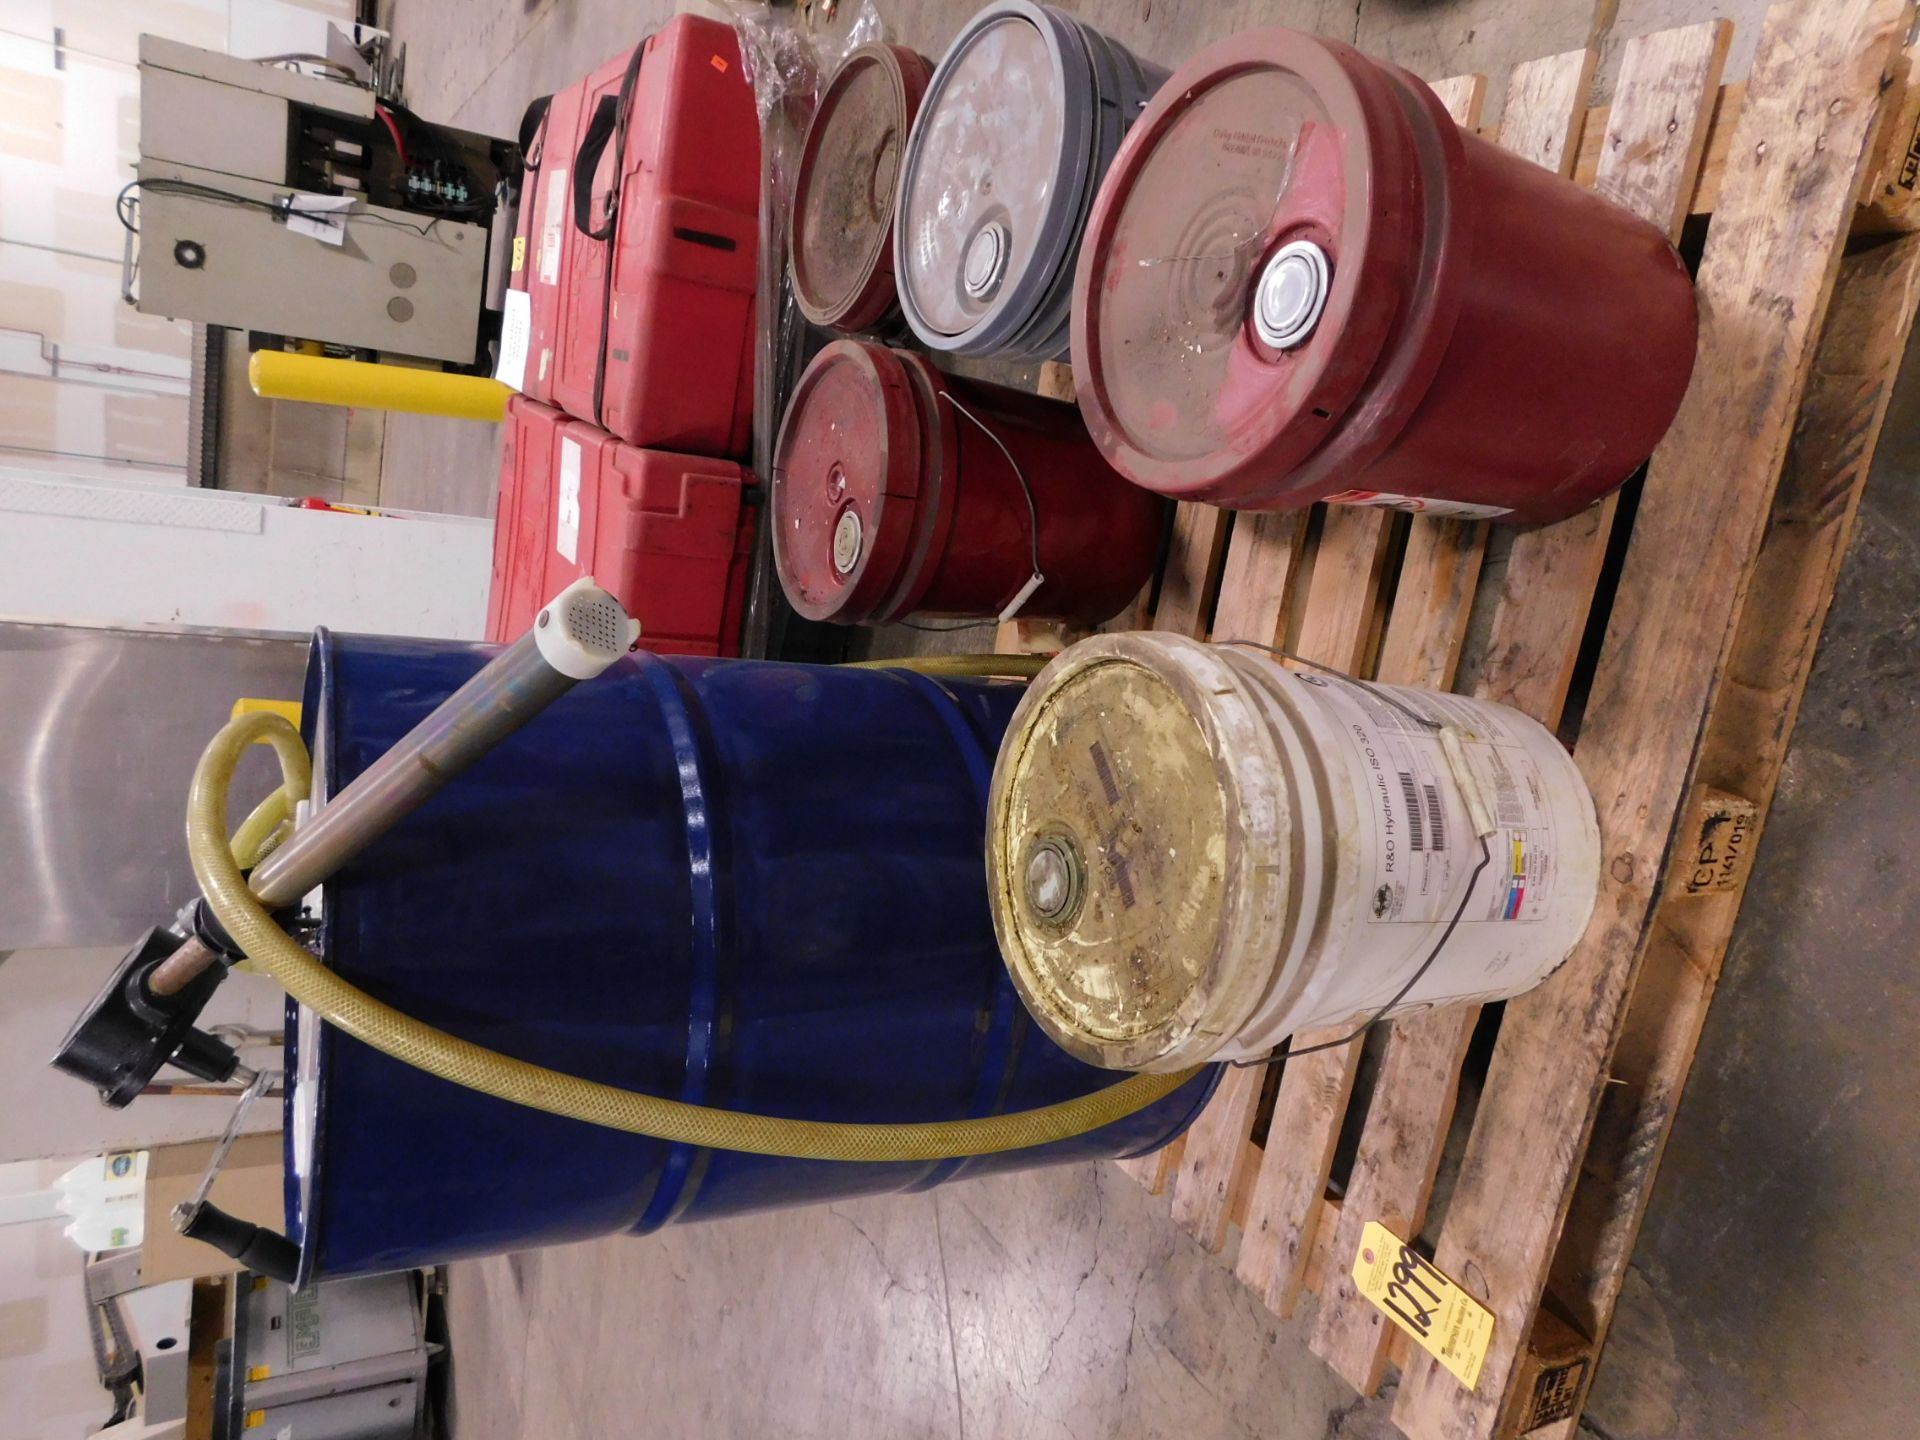 55 Gallon Drum of AW32 Hydraulic Oil-NEW, and (5) 5 Gallon Pails of Misc. Oil